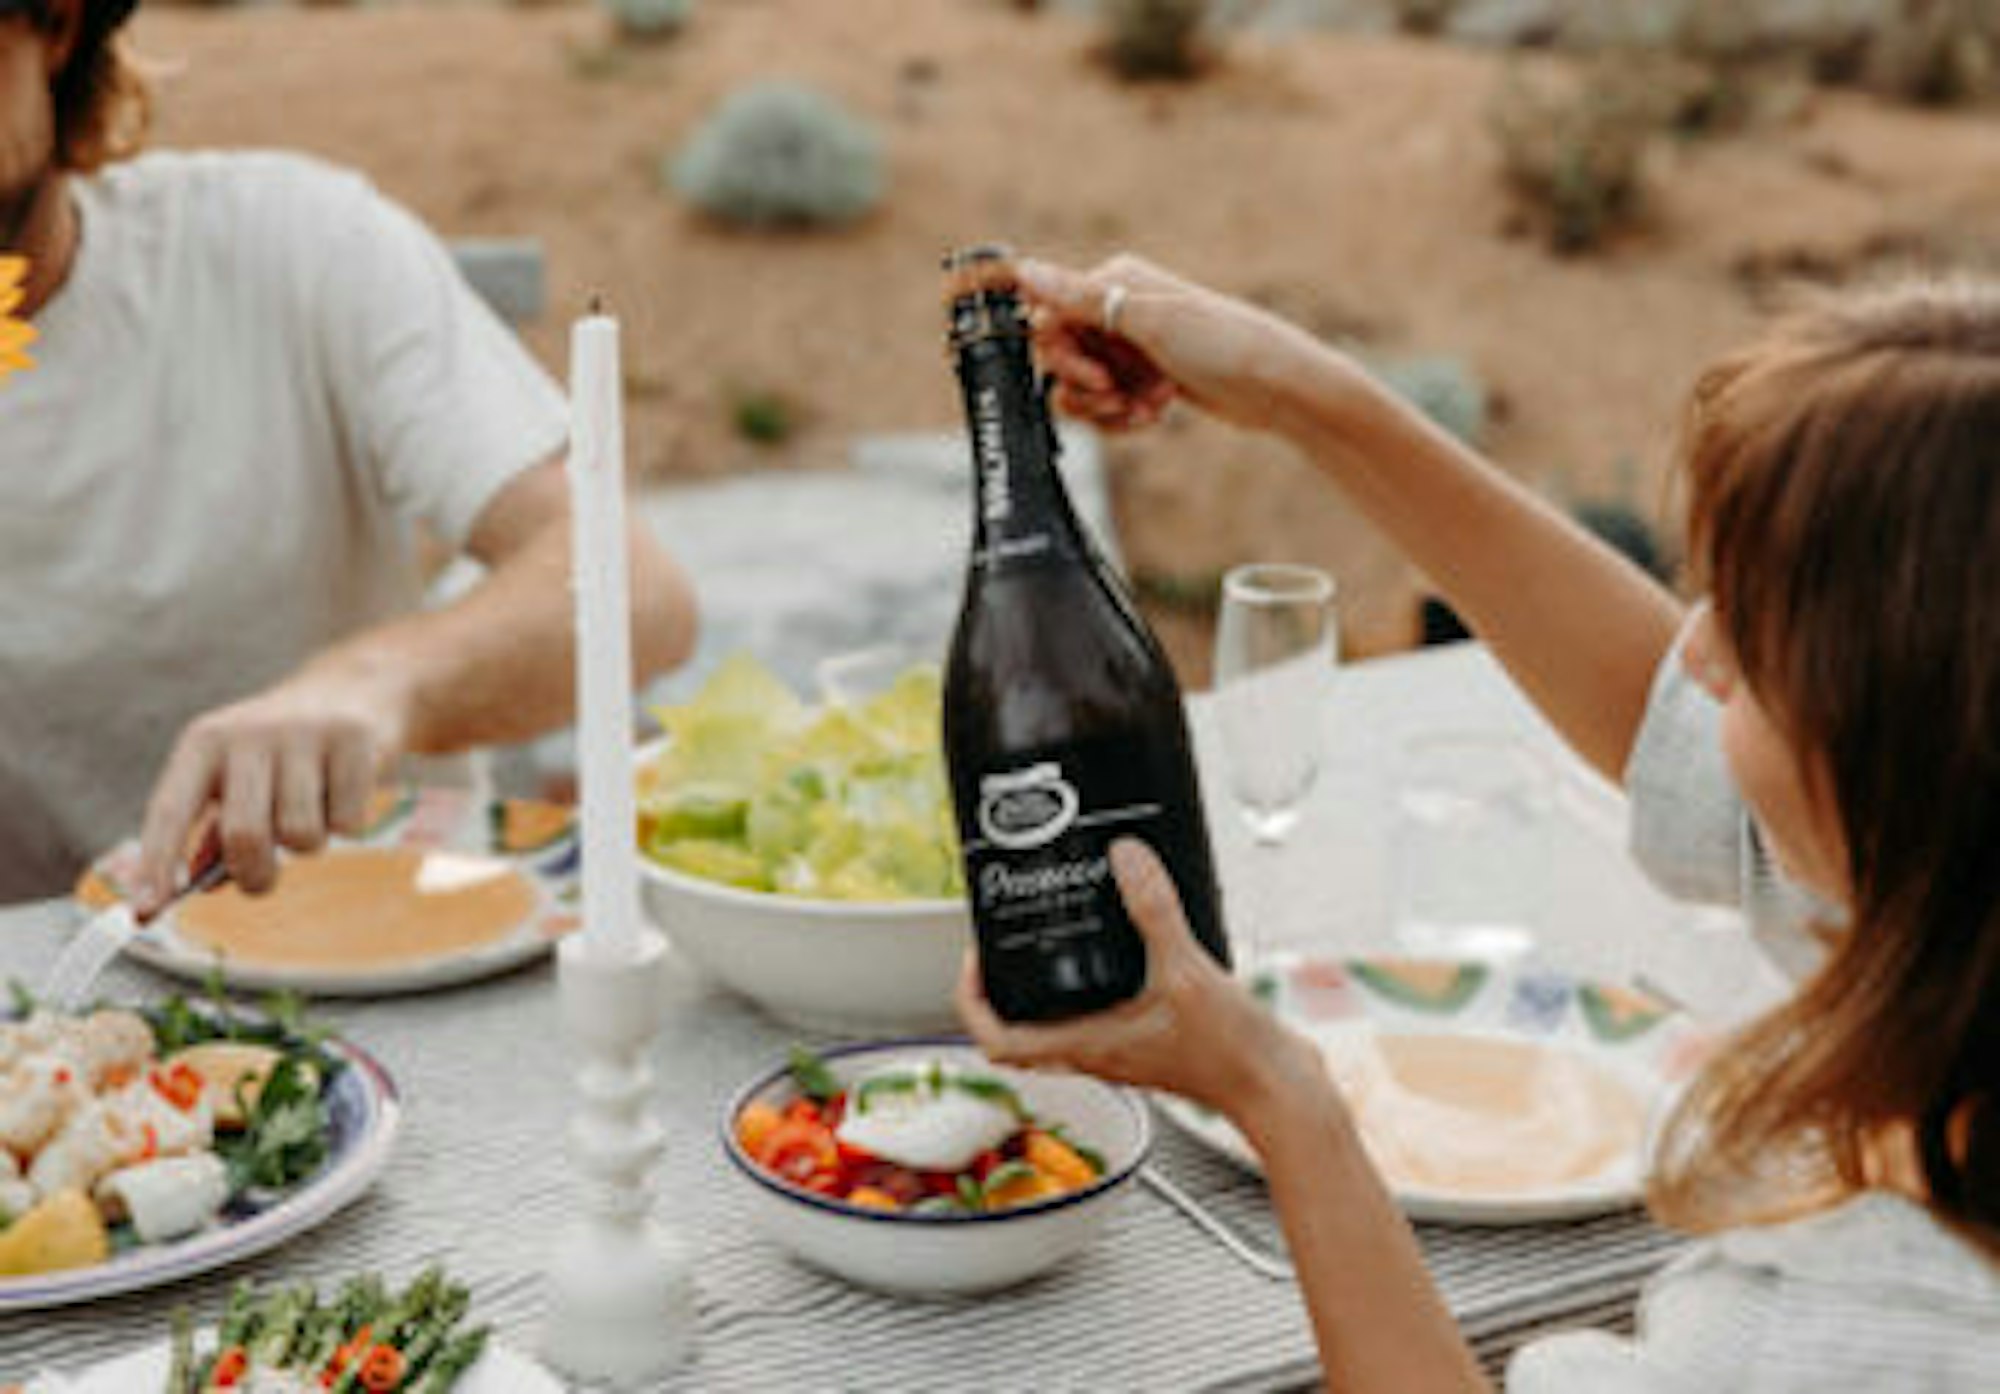 Bottle of Brown Brothers Premium Prosecco Brut in hand over a summer spread